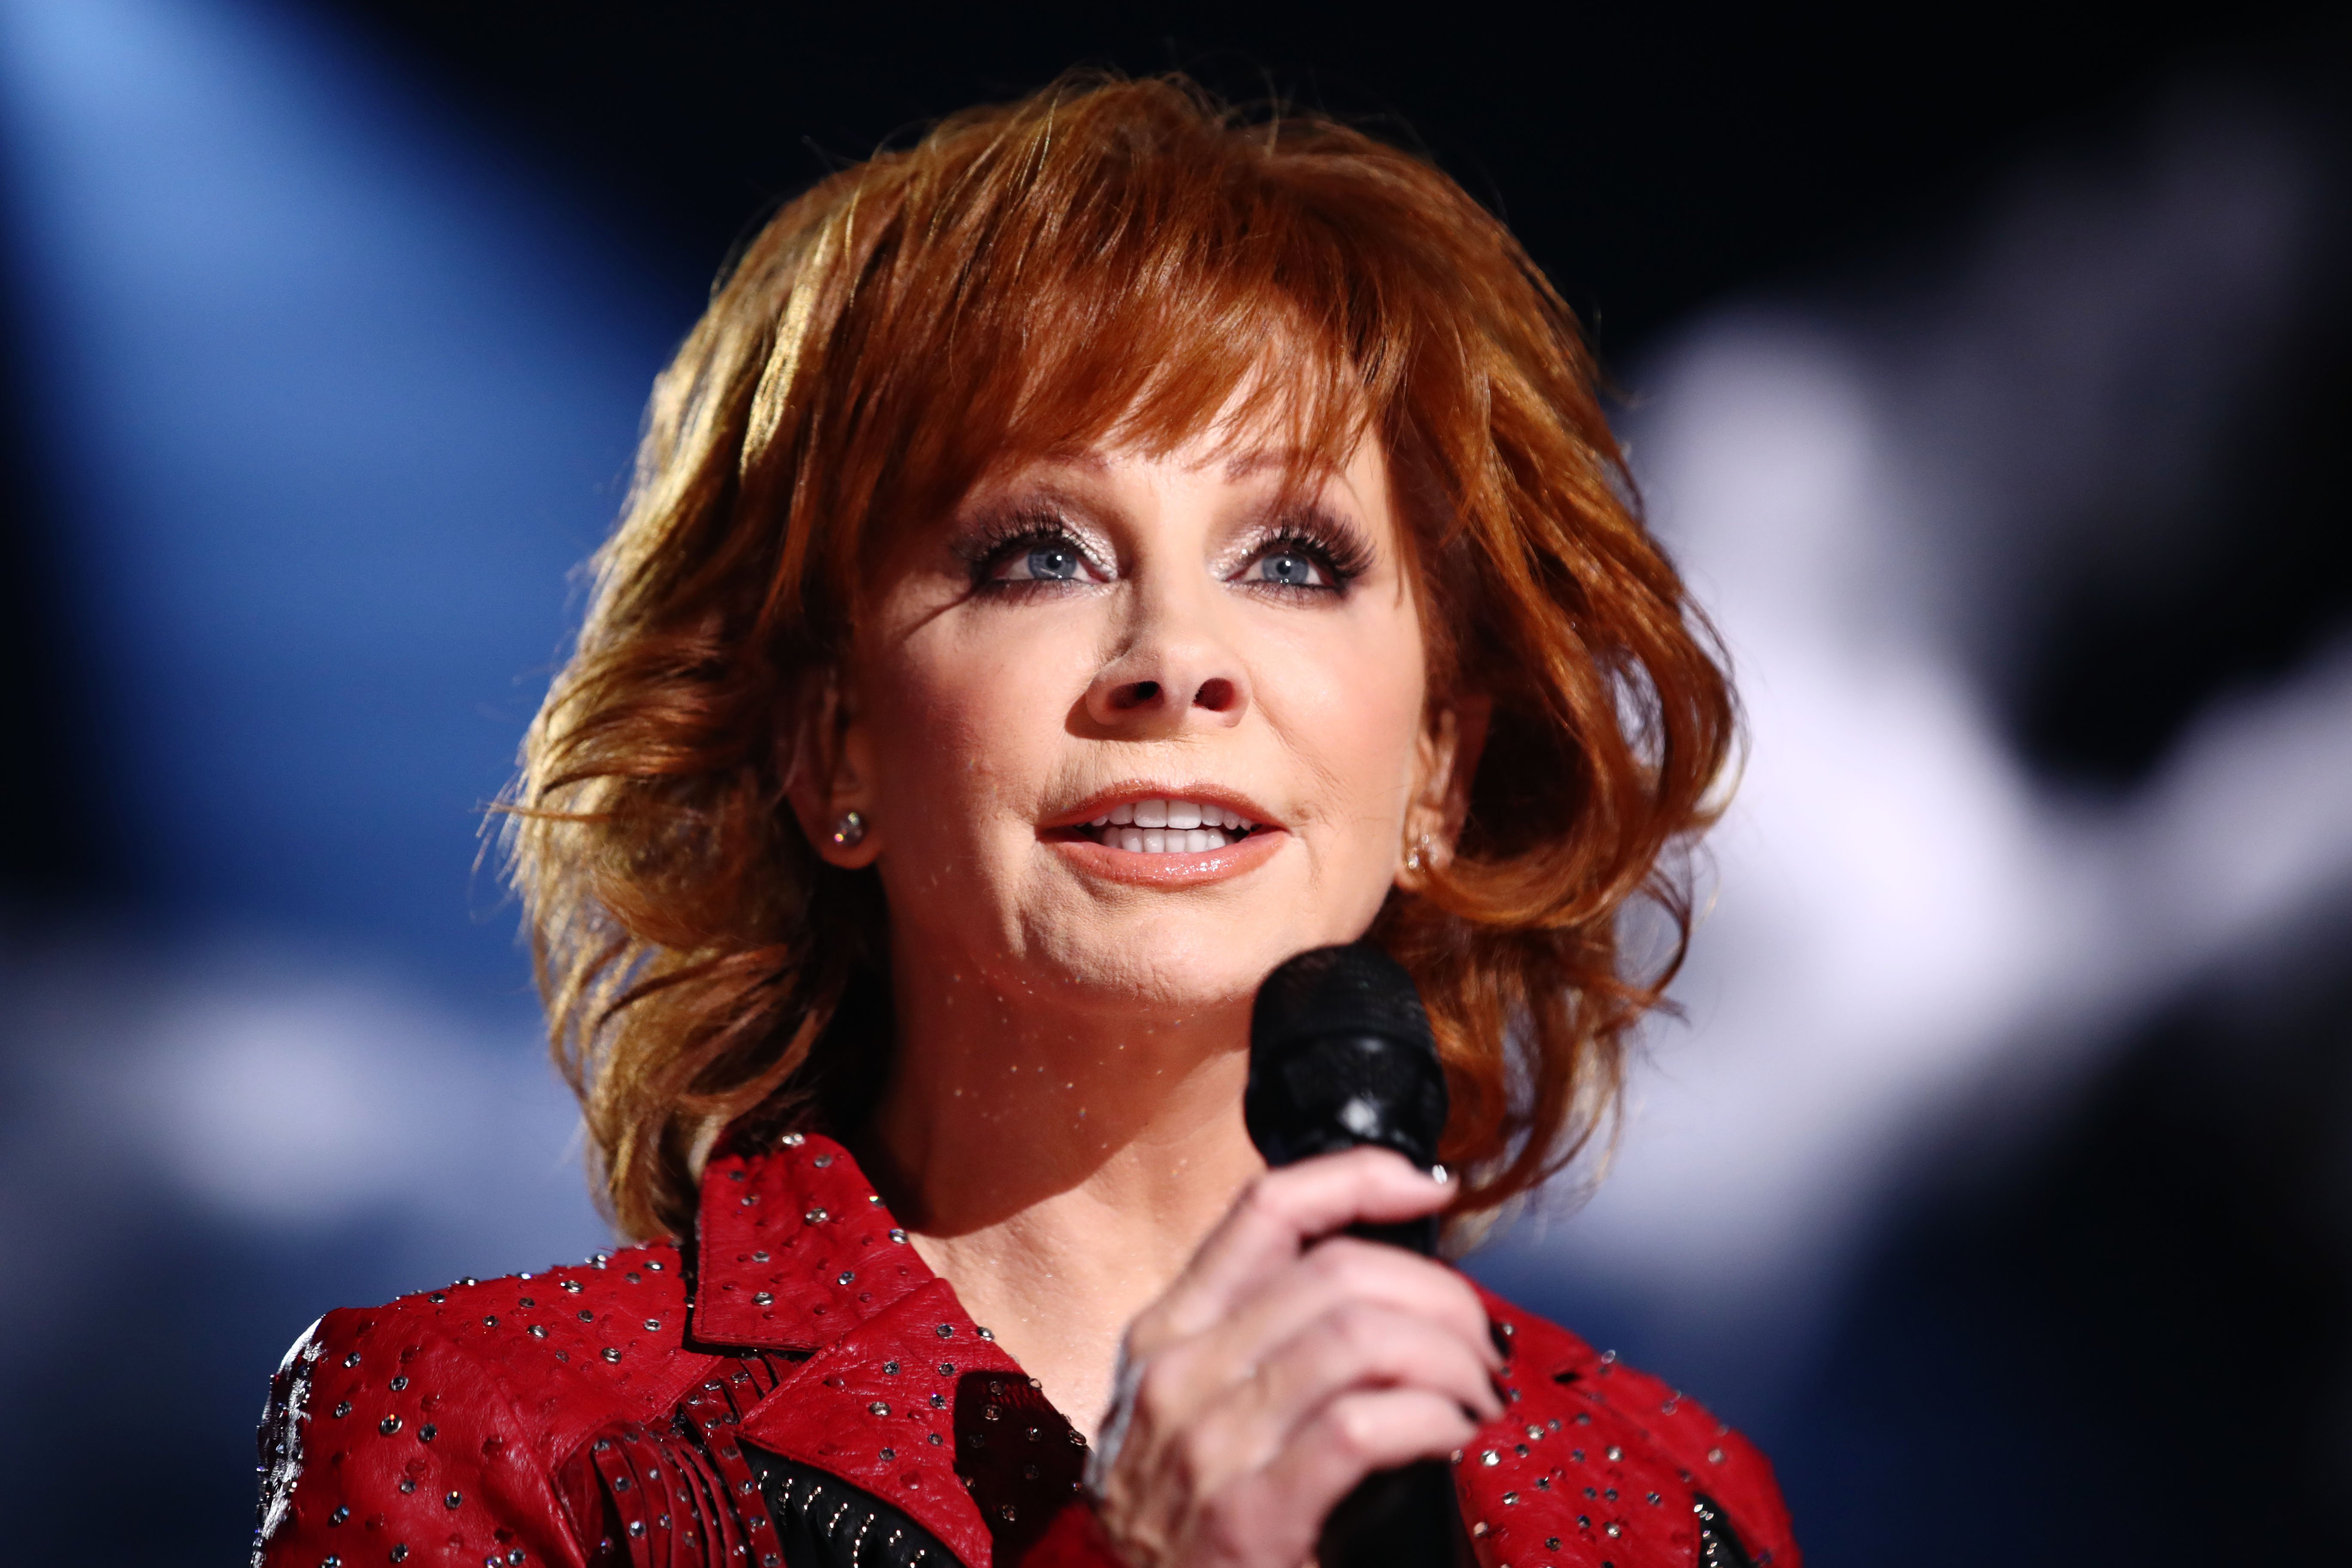 Reba McEntire performs onstage during the 54th Academy Of Country Music Awards at MGM Grand Garden Arena on April 07, 2019 | Photo: Getty Images